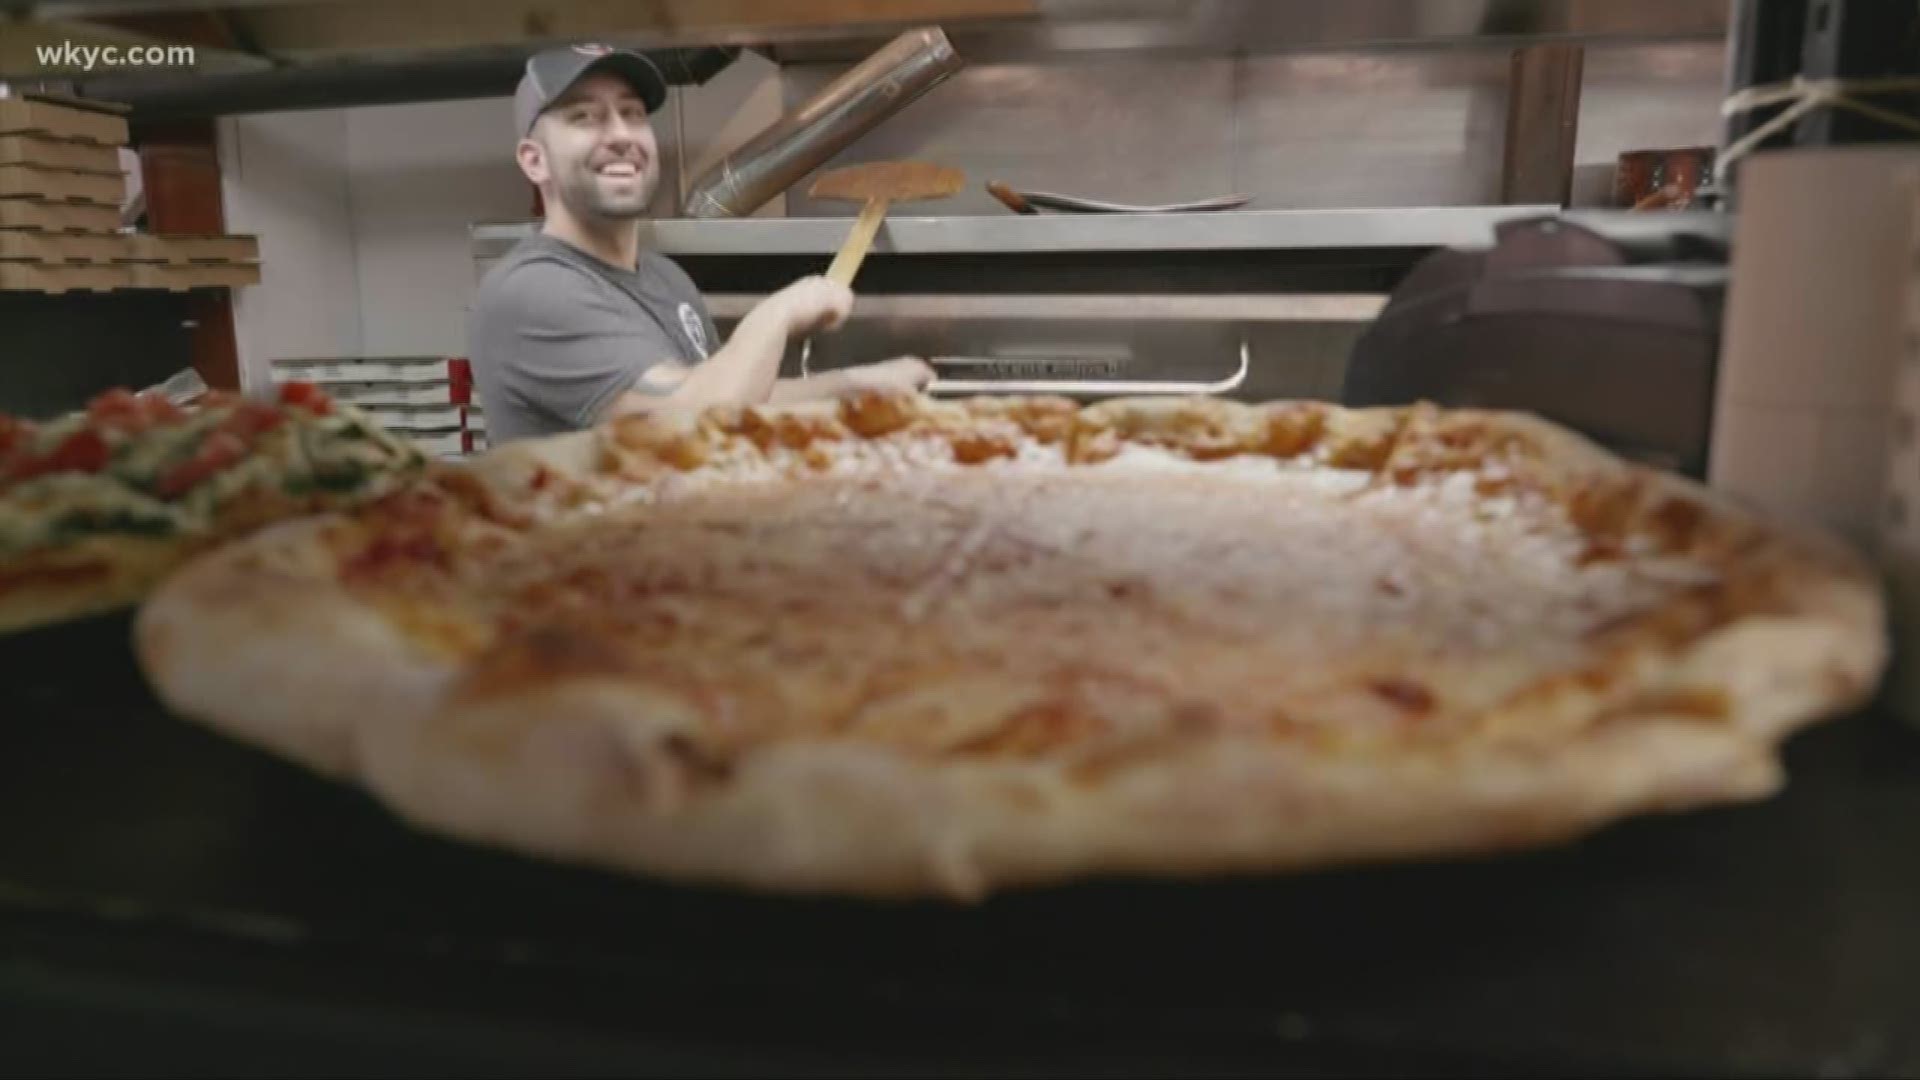 Purola's Bridge Street Pizzeria in historic Ashtabula Harbor has launched a plan to help people in their community one pizza slice at a time.